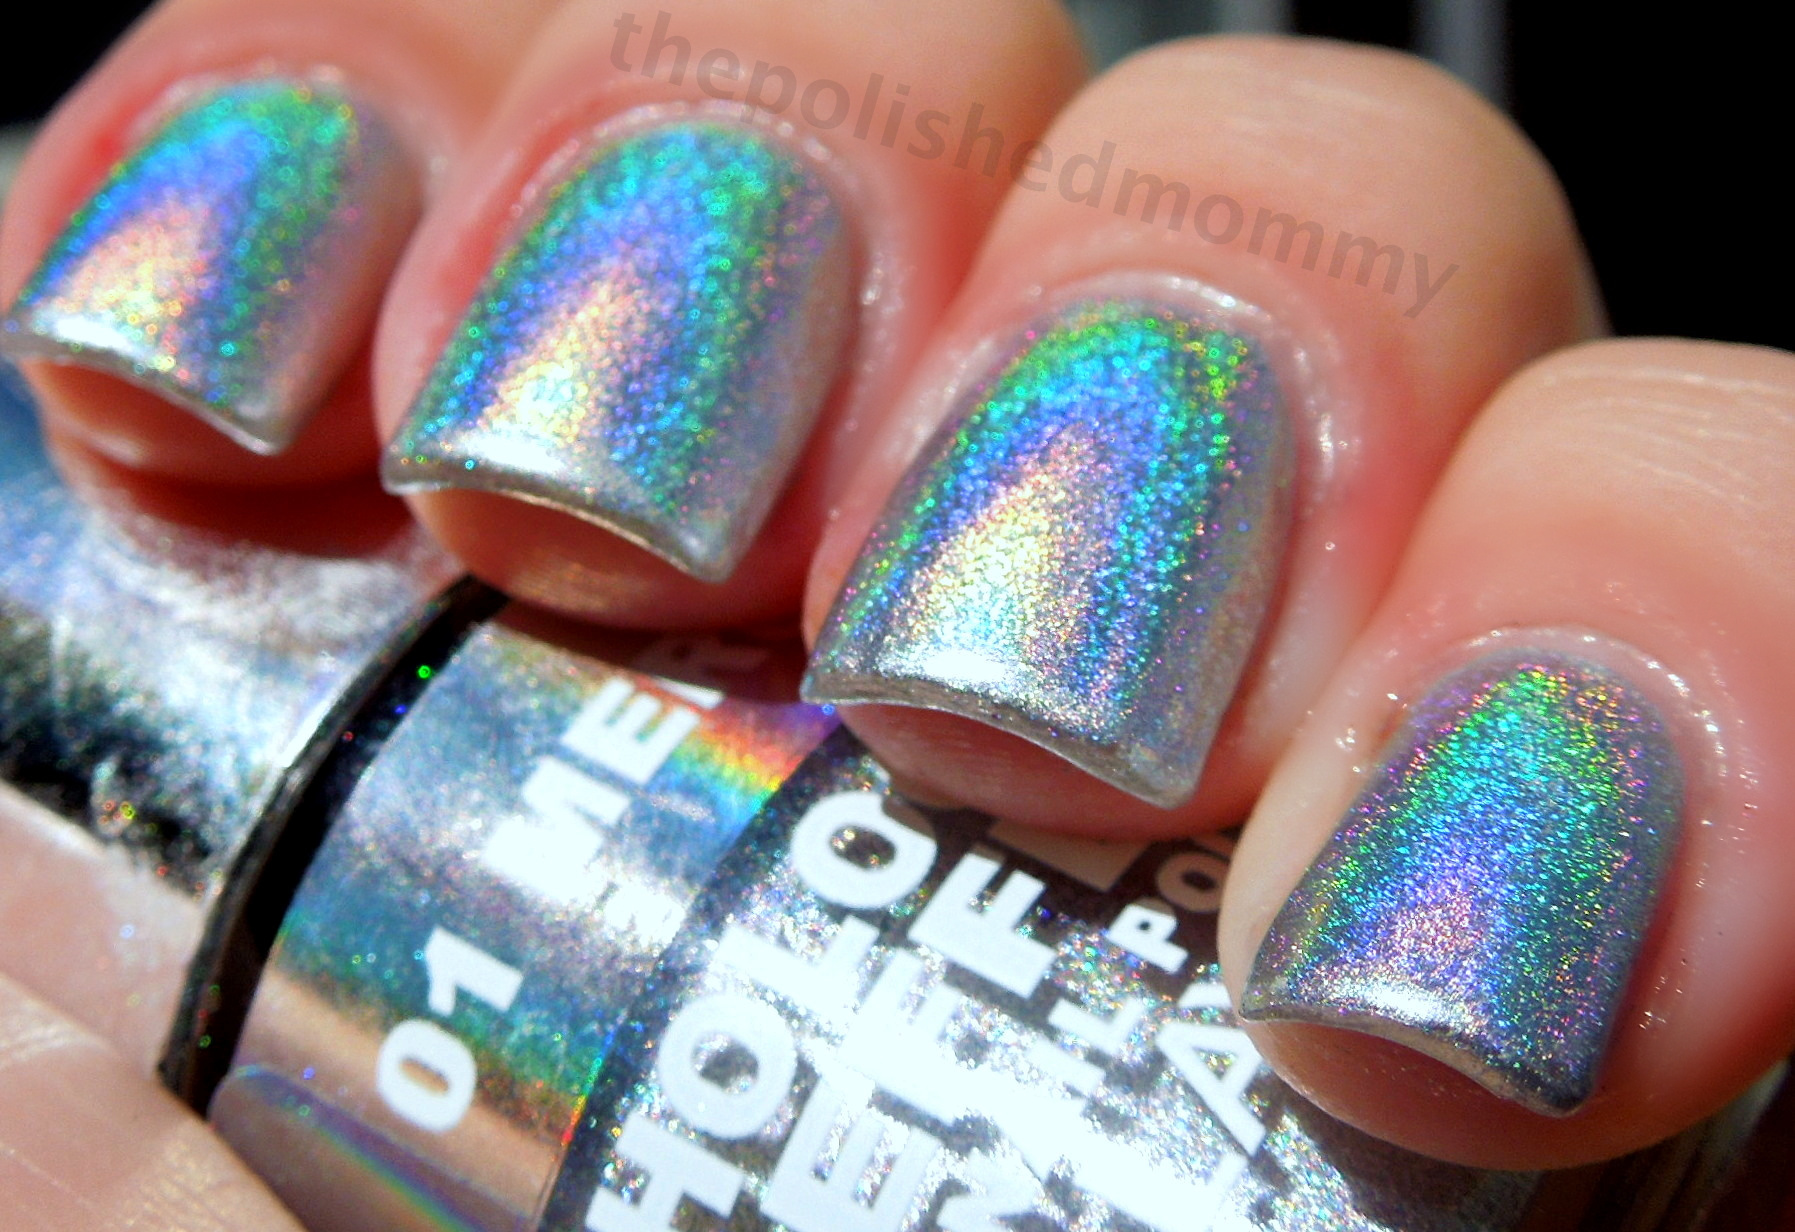 Maybelline Color Sensational Holographic Nail Polish - wide 6